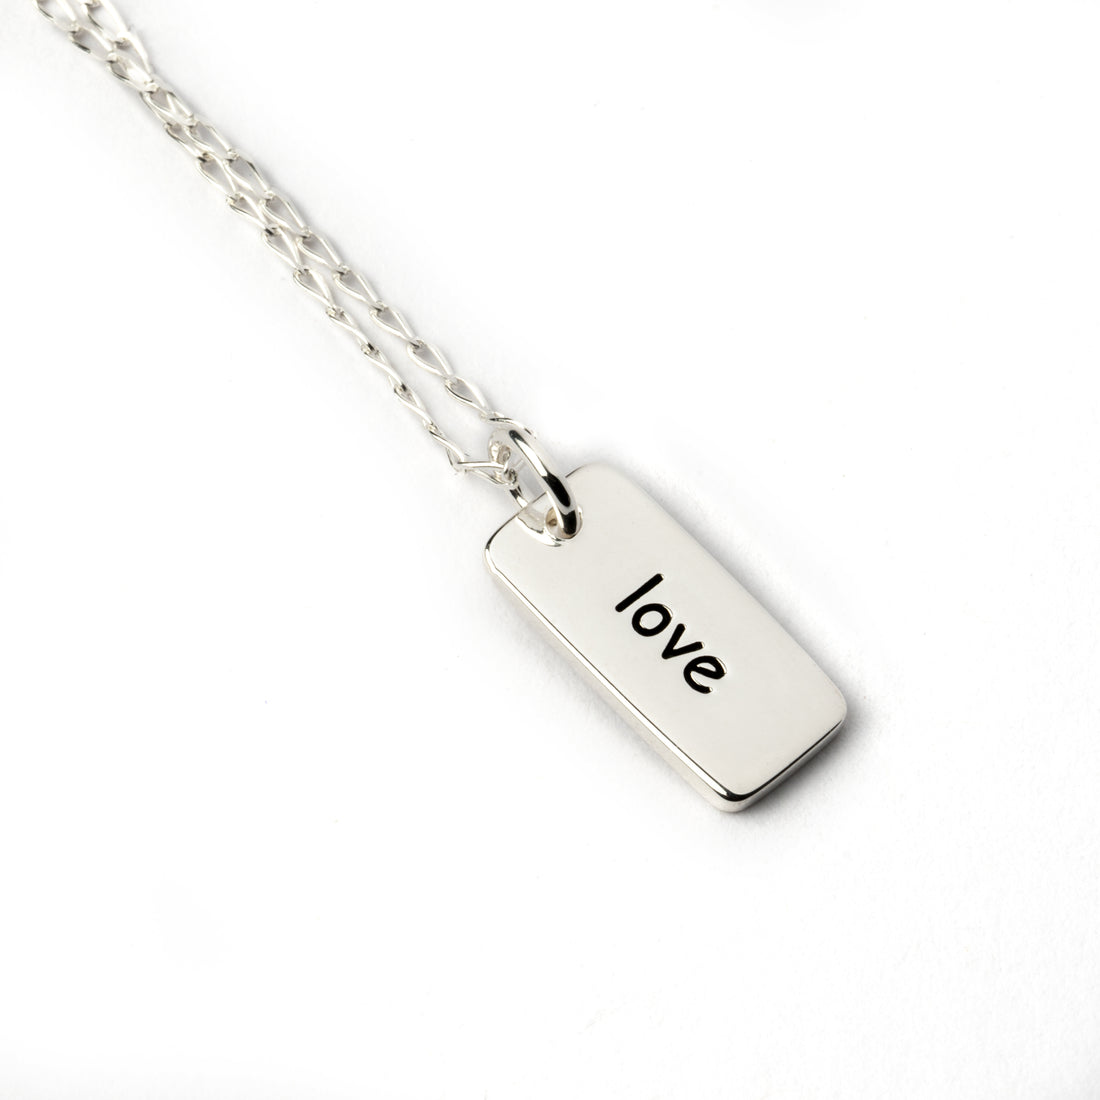 Silver Love Charm necklace left side view